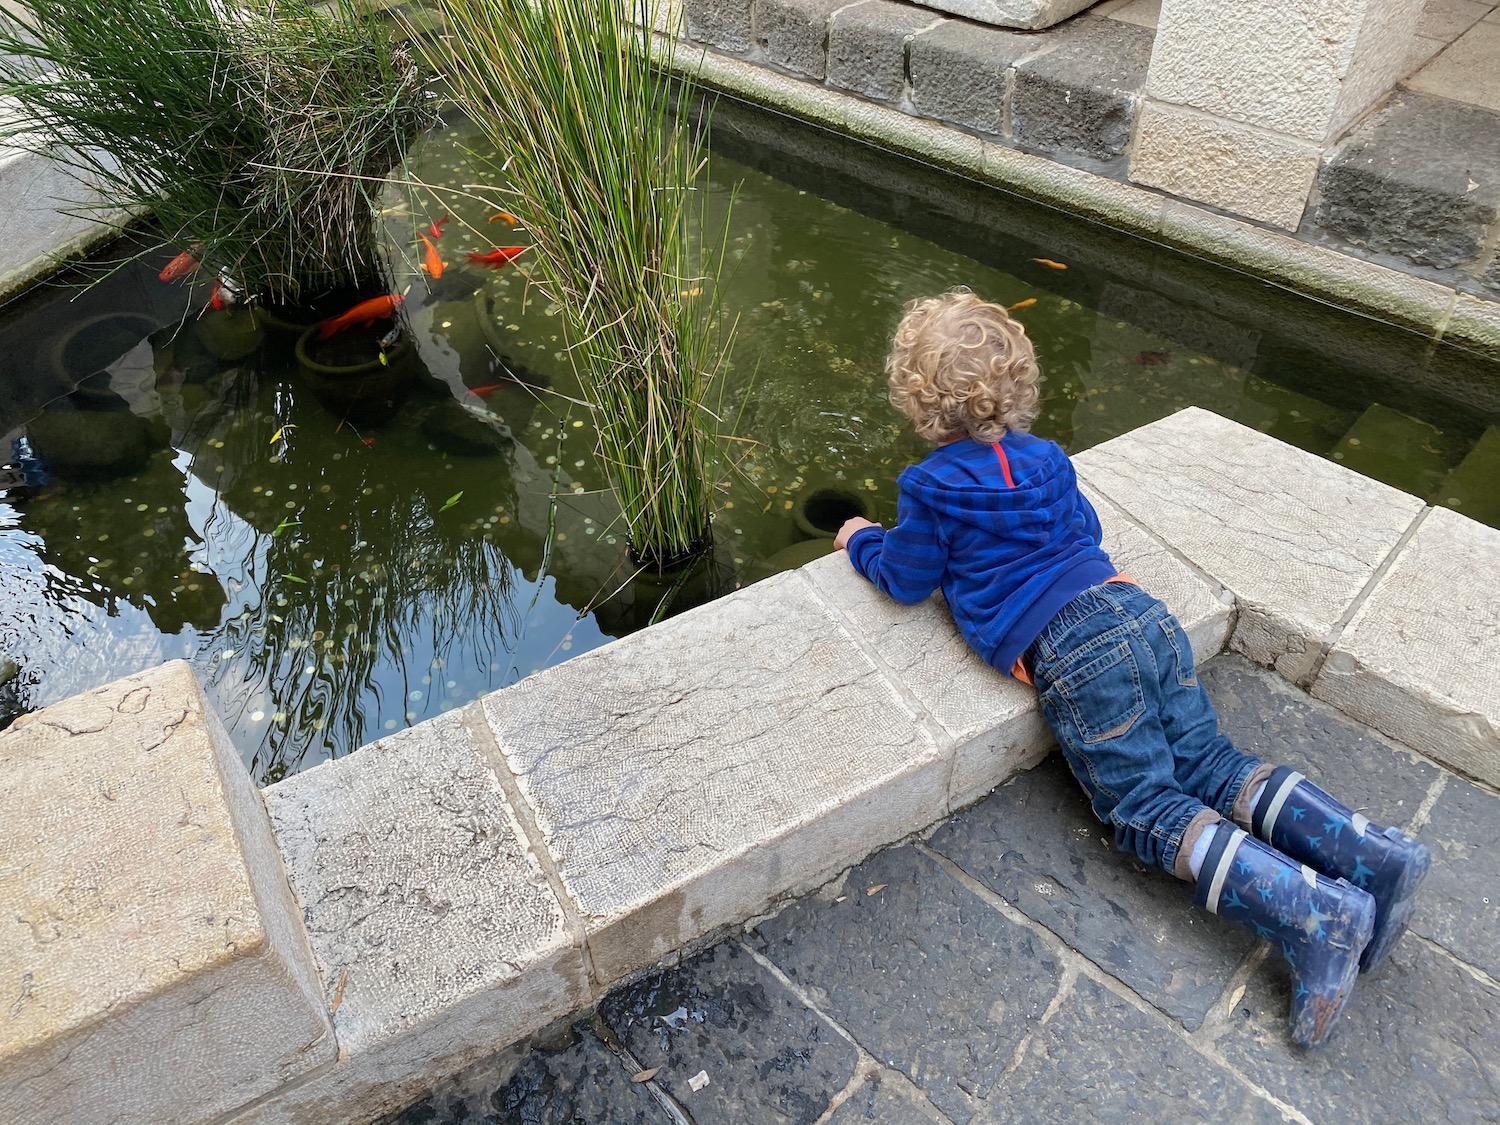 a child looking at fish in a pond